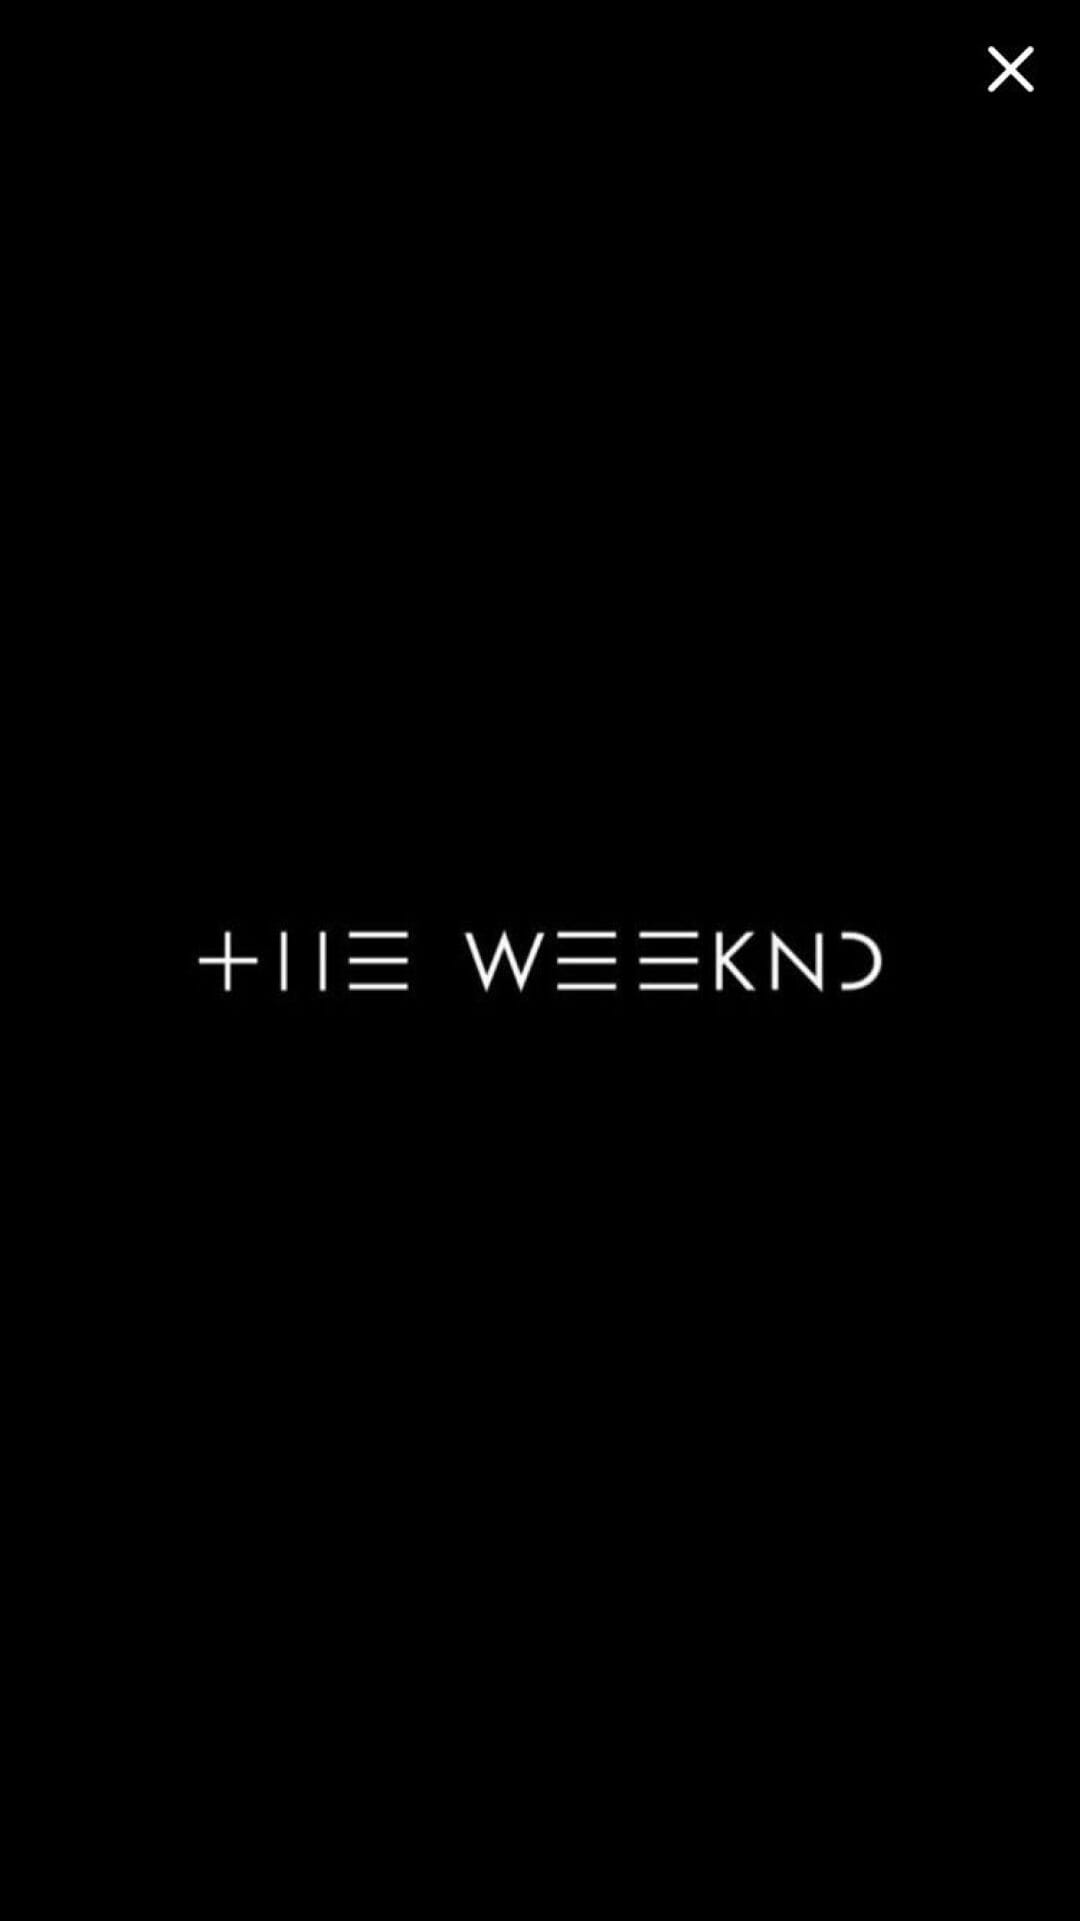 The weeknd album cover - The Weeknd